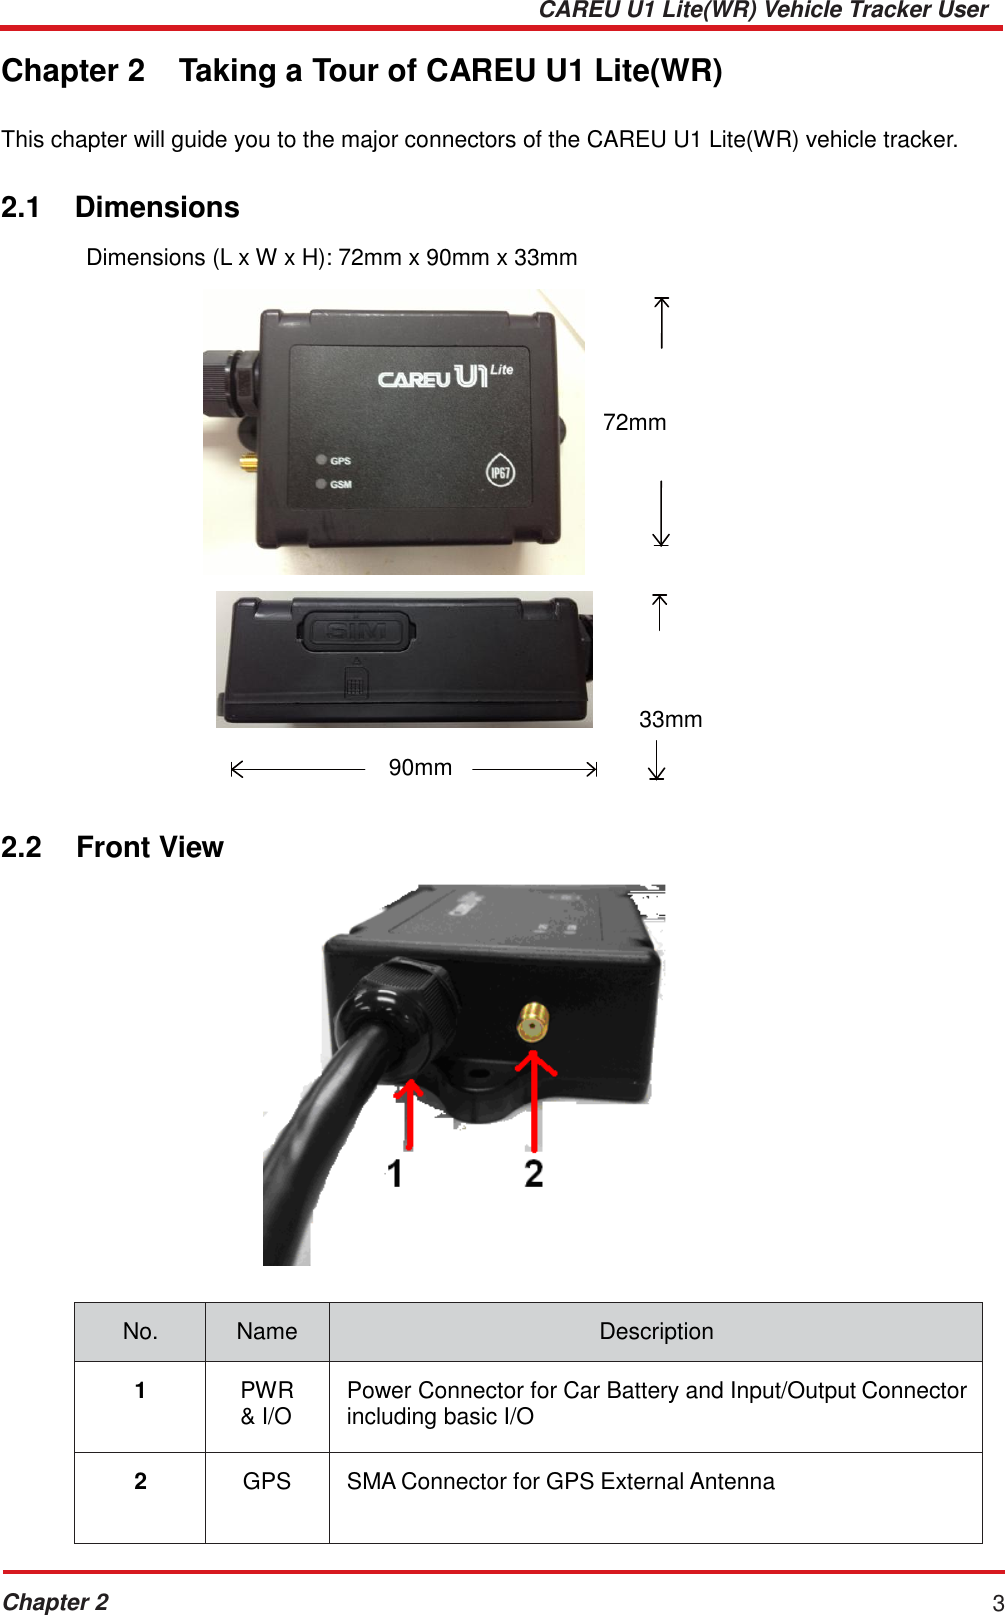 CAREU U1 Lite(WR) Vehicle Tracker User Guide Chapter 2 3    Chapter 2  Taking a Tour of CAREU U1 Lite(WR)  This chapter will guide you to the major connectors of the CAREU U1 Lite(WR) vehicle tracker.   2.1  Dimensions  Dimensions (L x W x H): 72mm x 90mm x 33mm        72mm           33mm  90mm   2.2  Front View    No.  Name  Description  1  PWR &amp; I/O  Power Connector for Car Battery and Input/Output Connector including basic I/O  2  GPS  SMA Connector for GPS External Antenna  